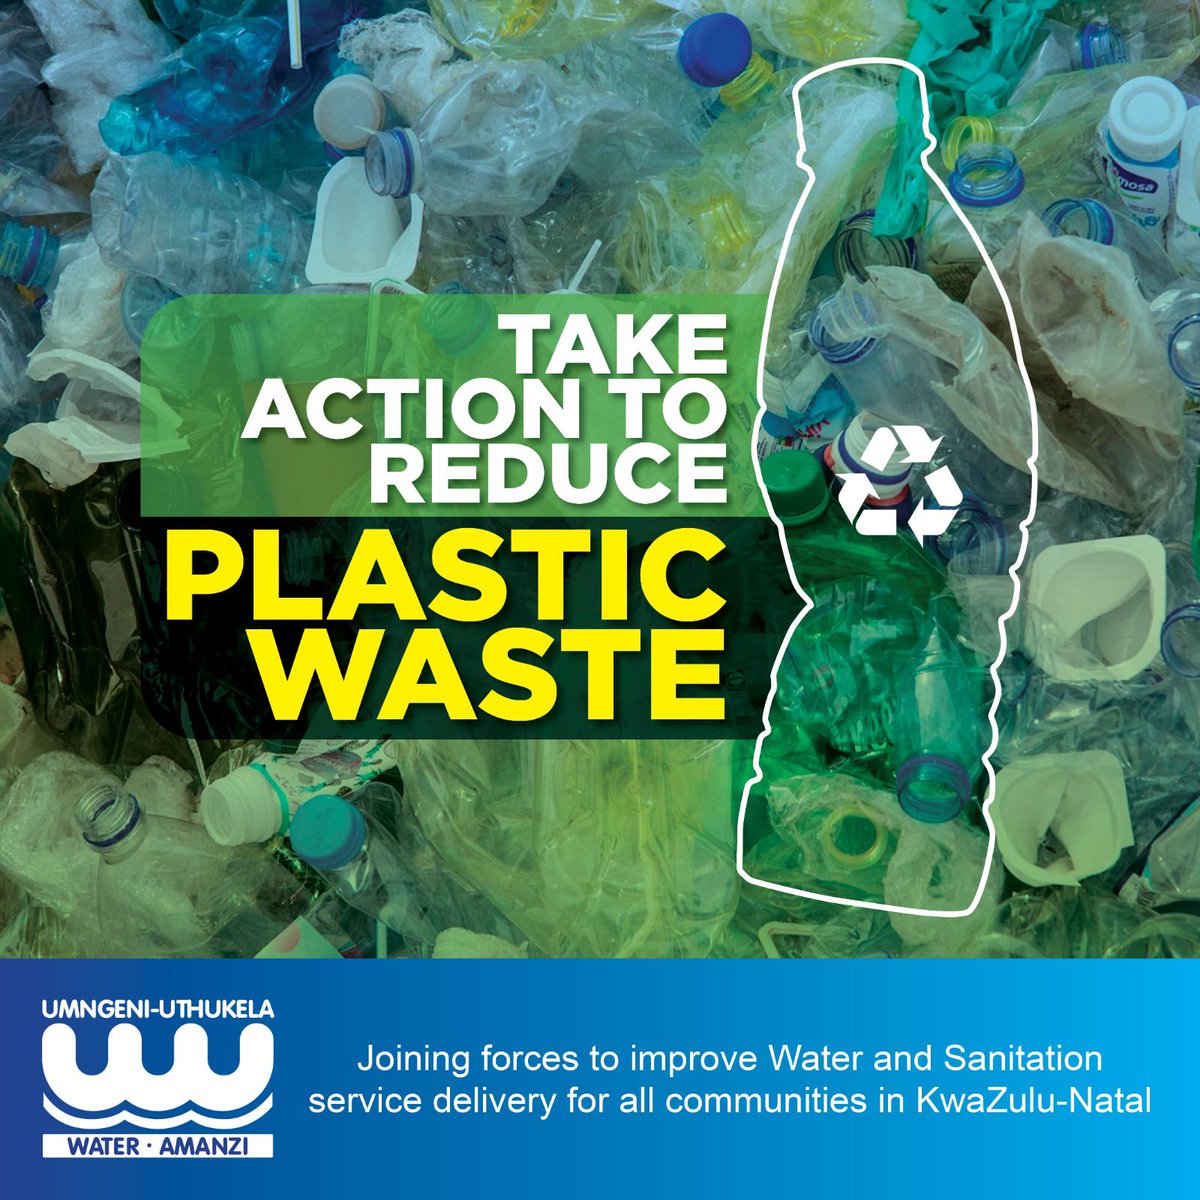 DID YOU KNOW? Plastic pollution chokes marine wildlife, spreads toxins, damages soil, poisons groundwater, contributes to global warming and can have serious health impacts. Read below tips to #TakeAction to reduce plastic waste. #BeatPlasticPollution shorturl.at/bvx05